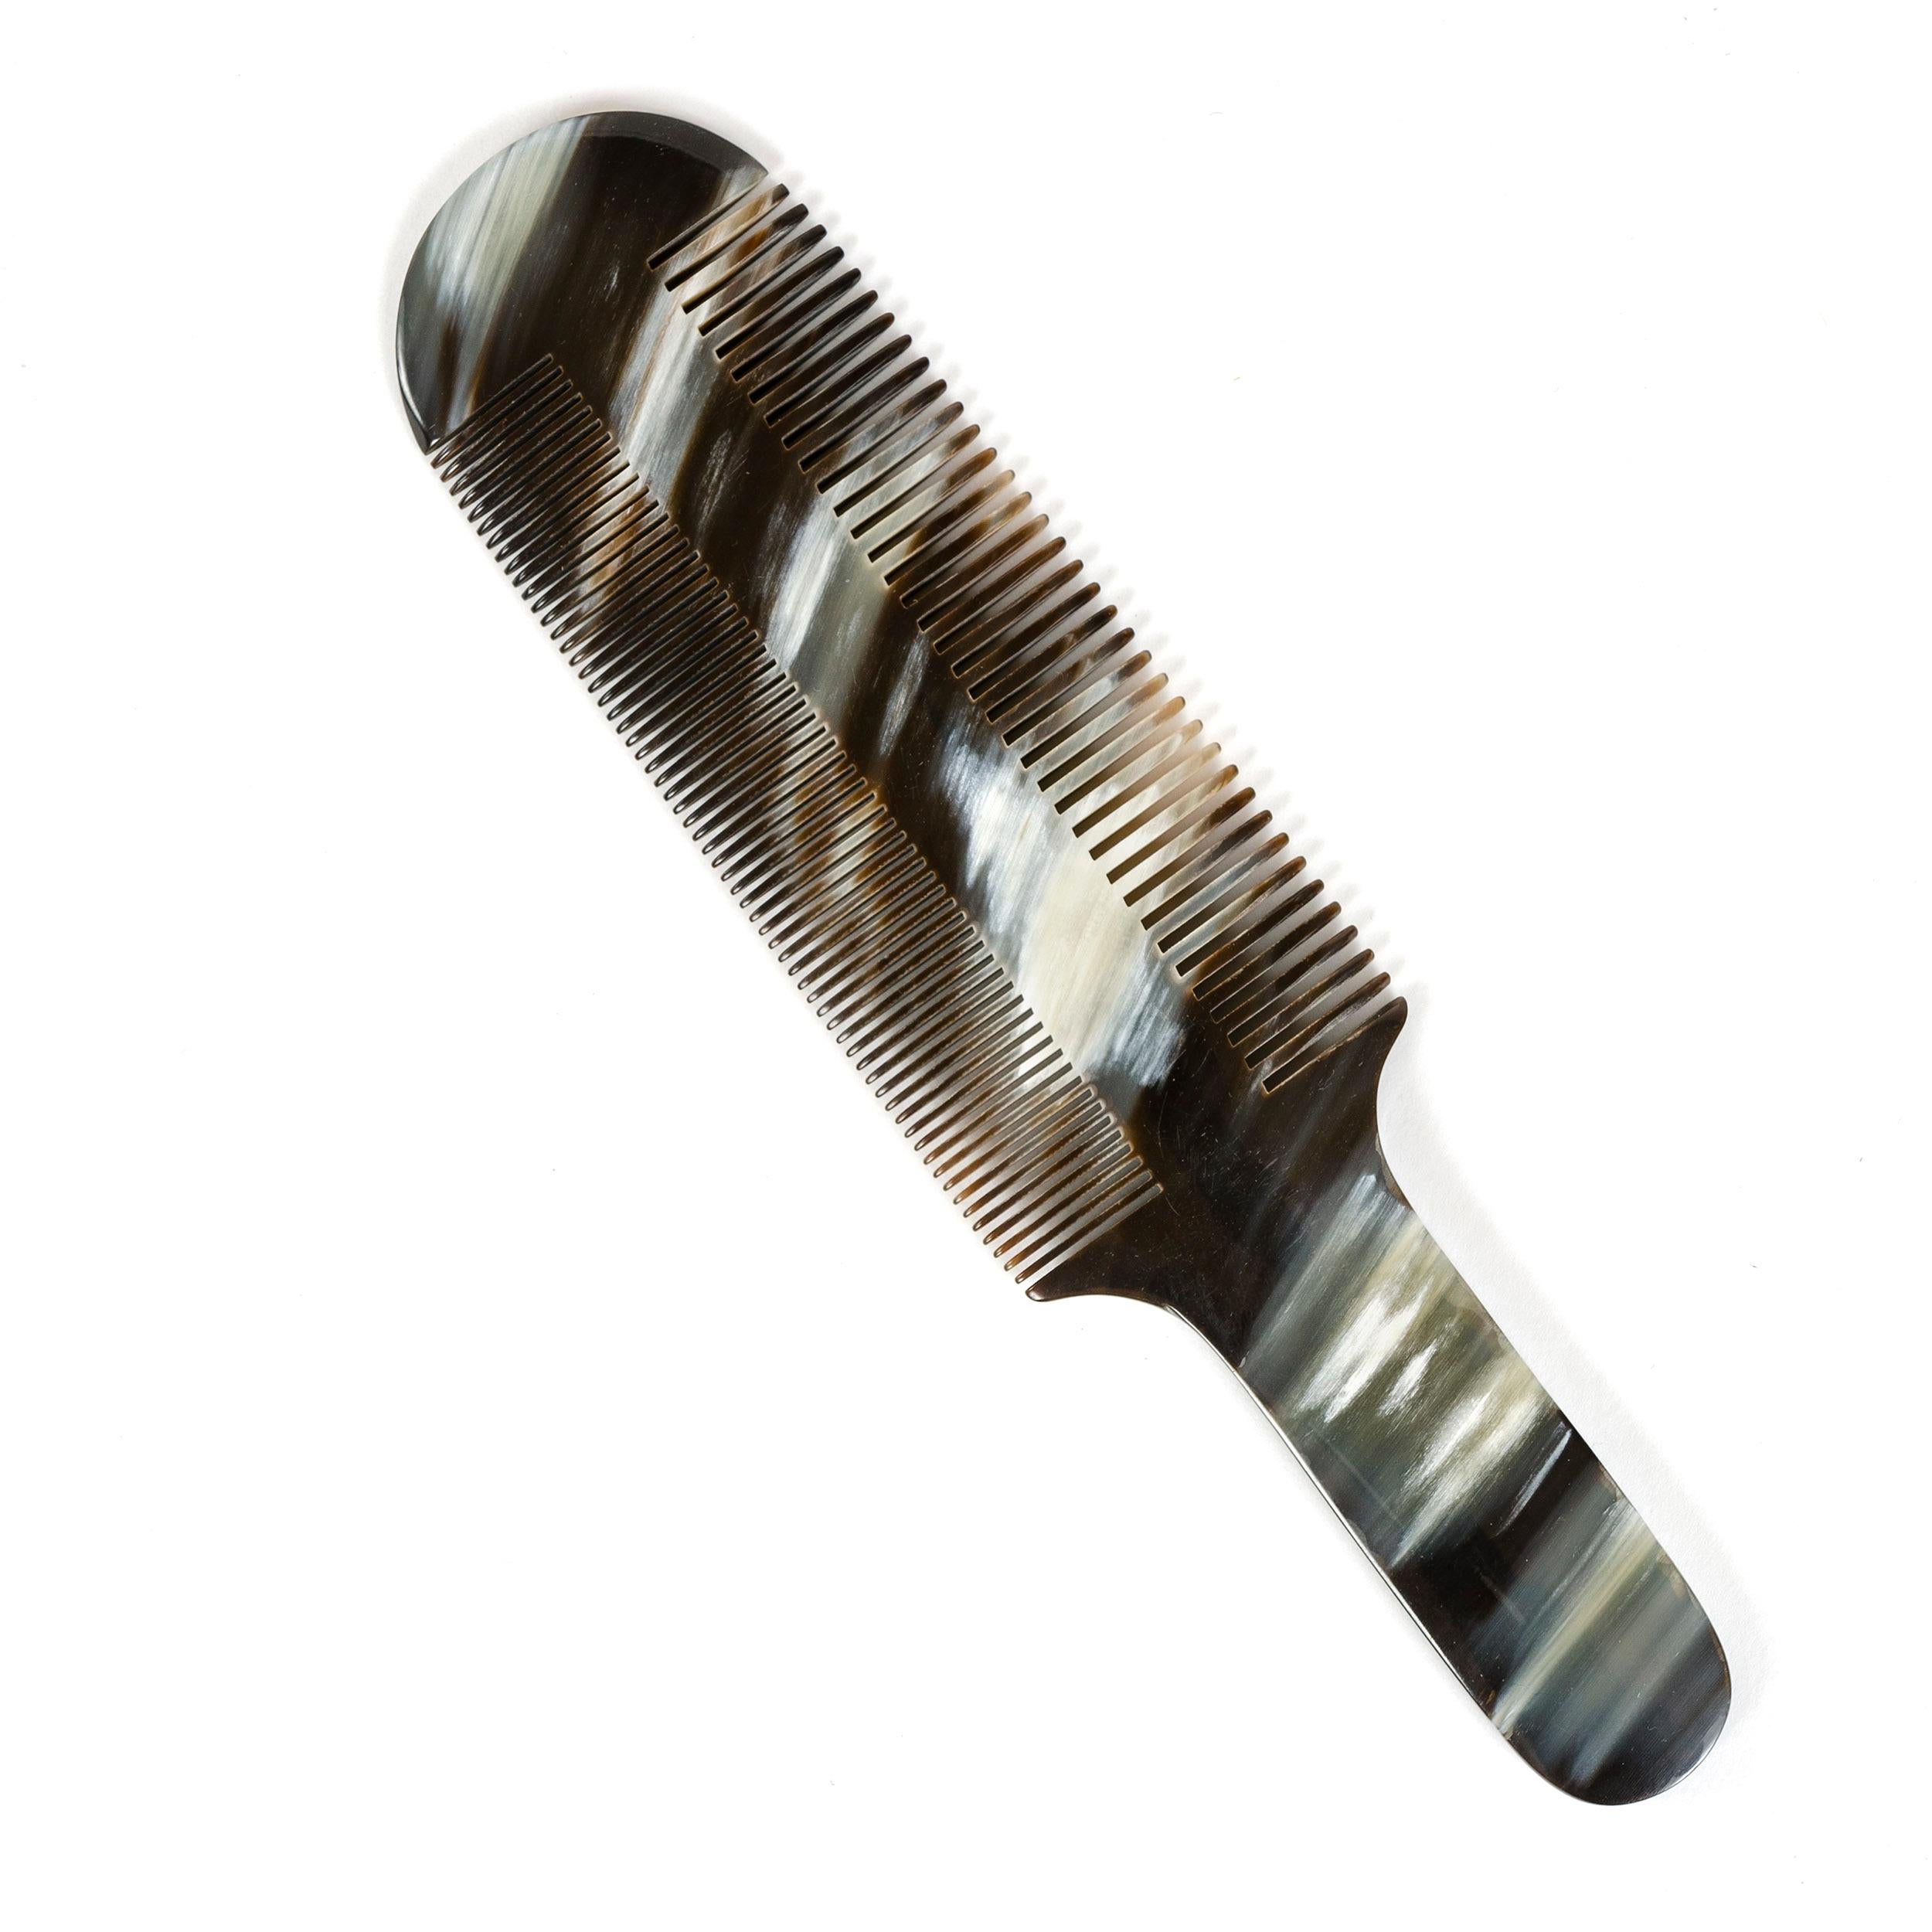 An elegant comb hand carved from cow horn with naturally occurring variations in color and pattern.